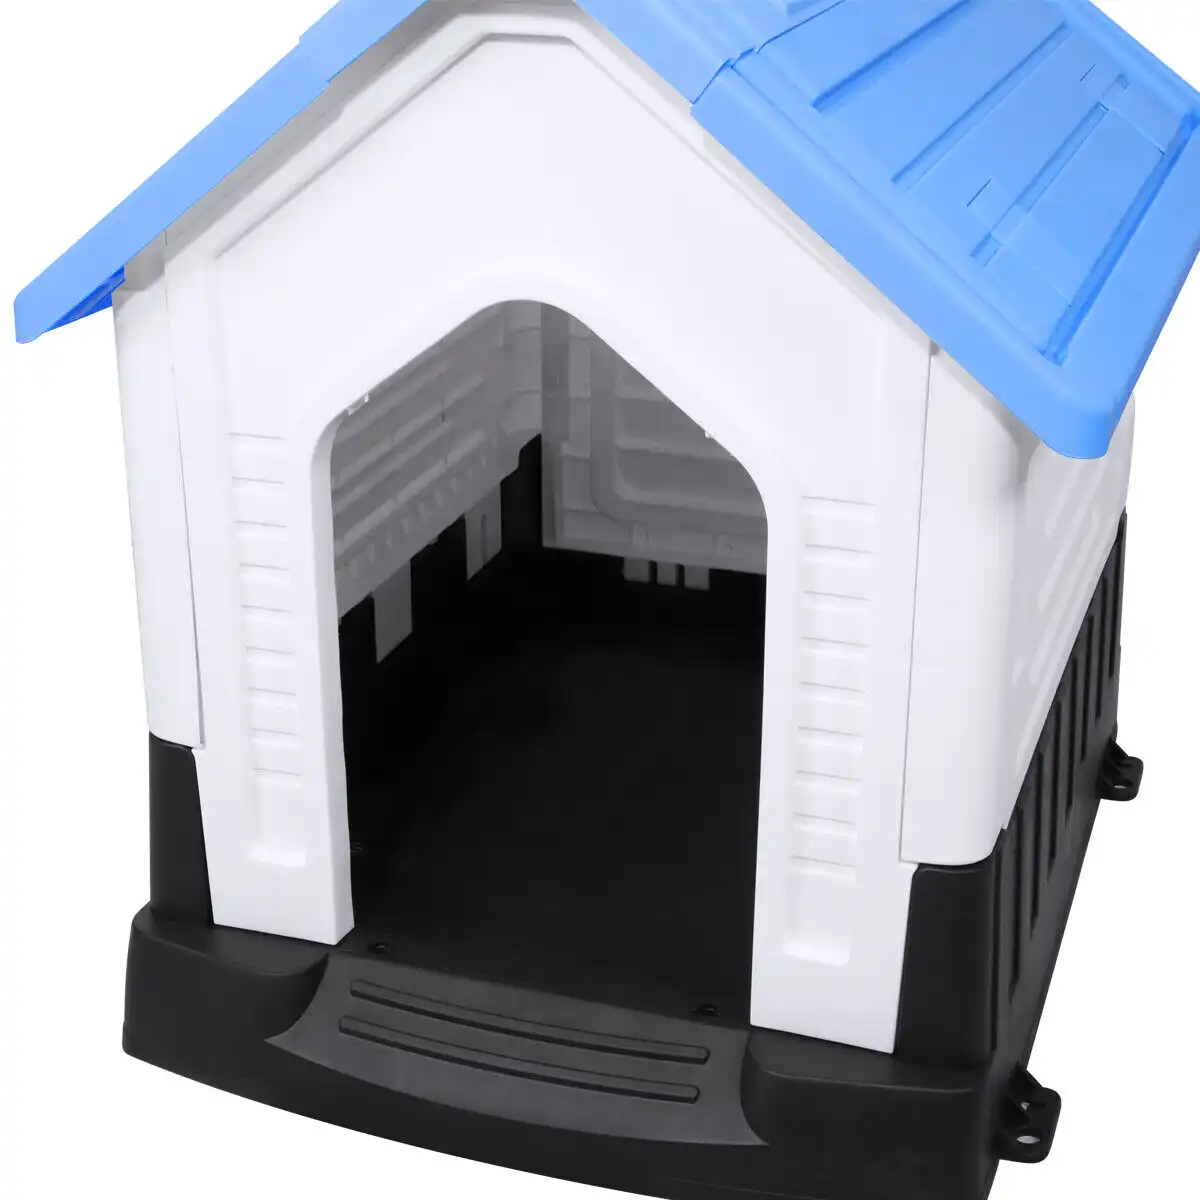 Dog House Waterproof Pet Shelter Puppy Kennel - Up to 25lb